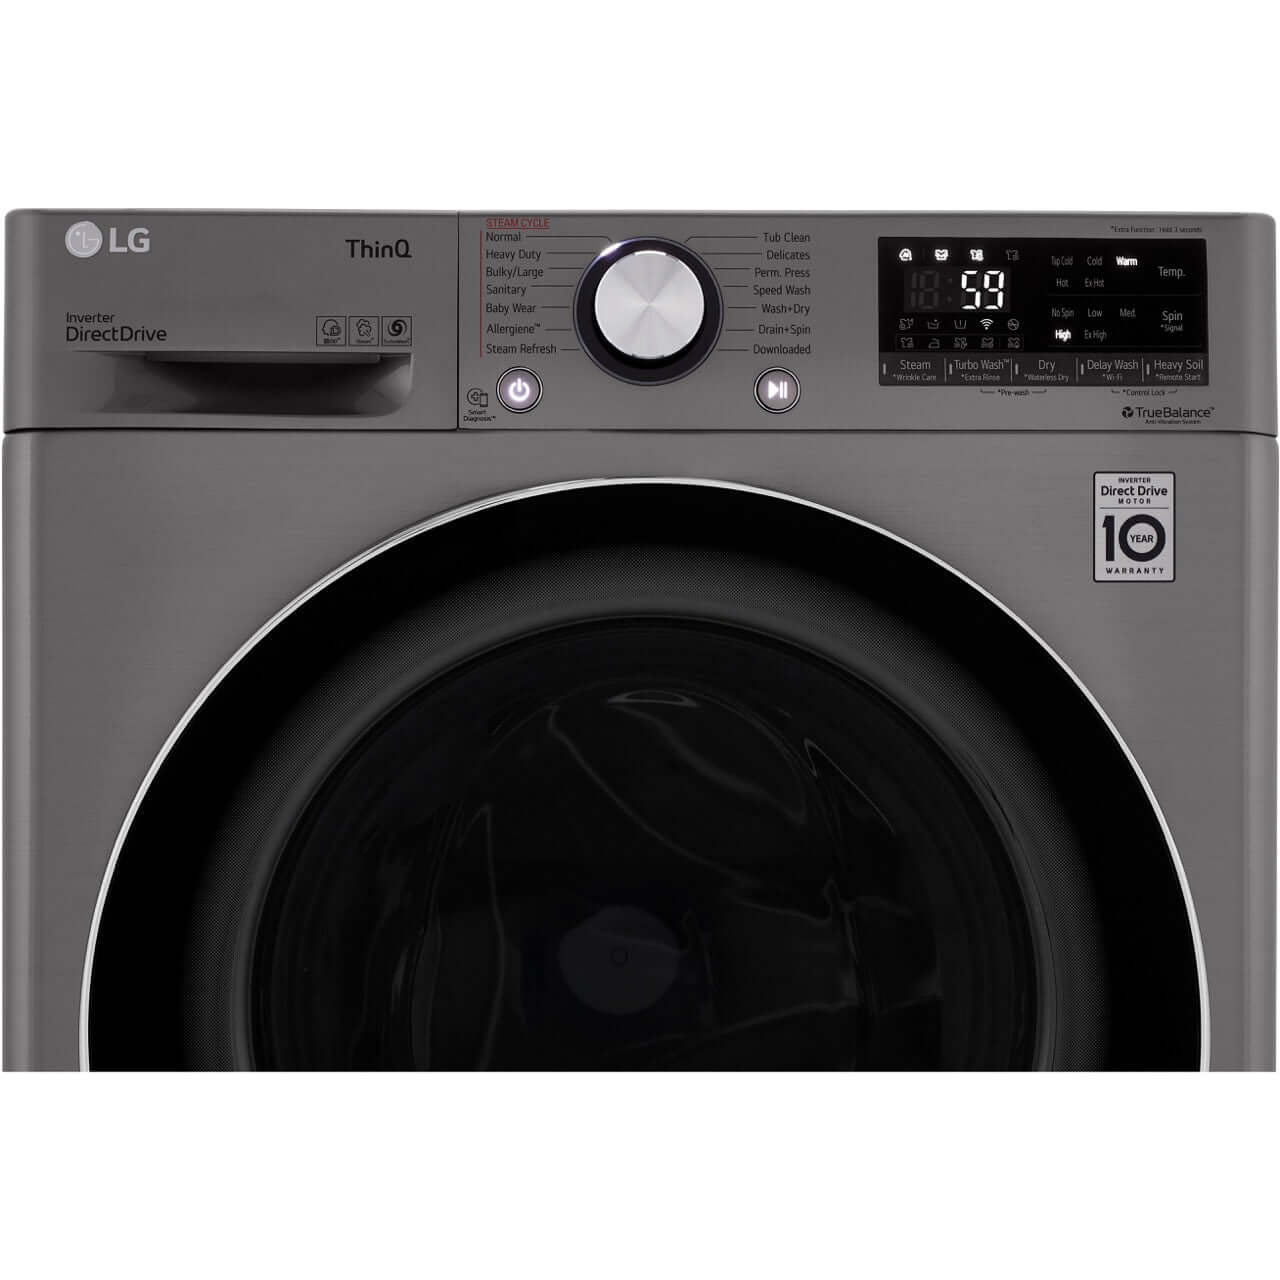 LG 2.4-Cu. Ft. Smart Wi-Fi-Enabled Compact Front-Load All-In-One Washer/Dryer Combo with Built-In Intelligence in Graphite Steel (WM3555HVA)